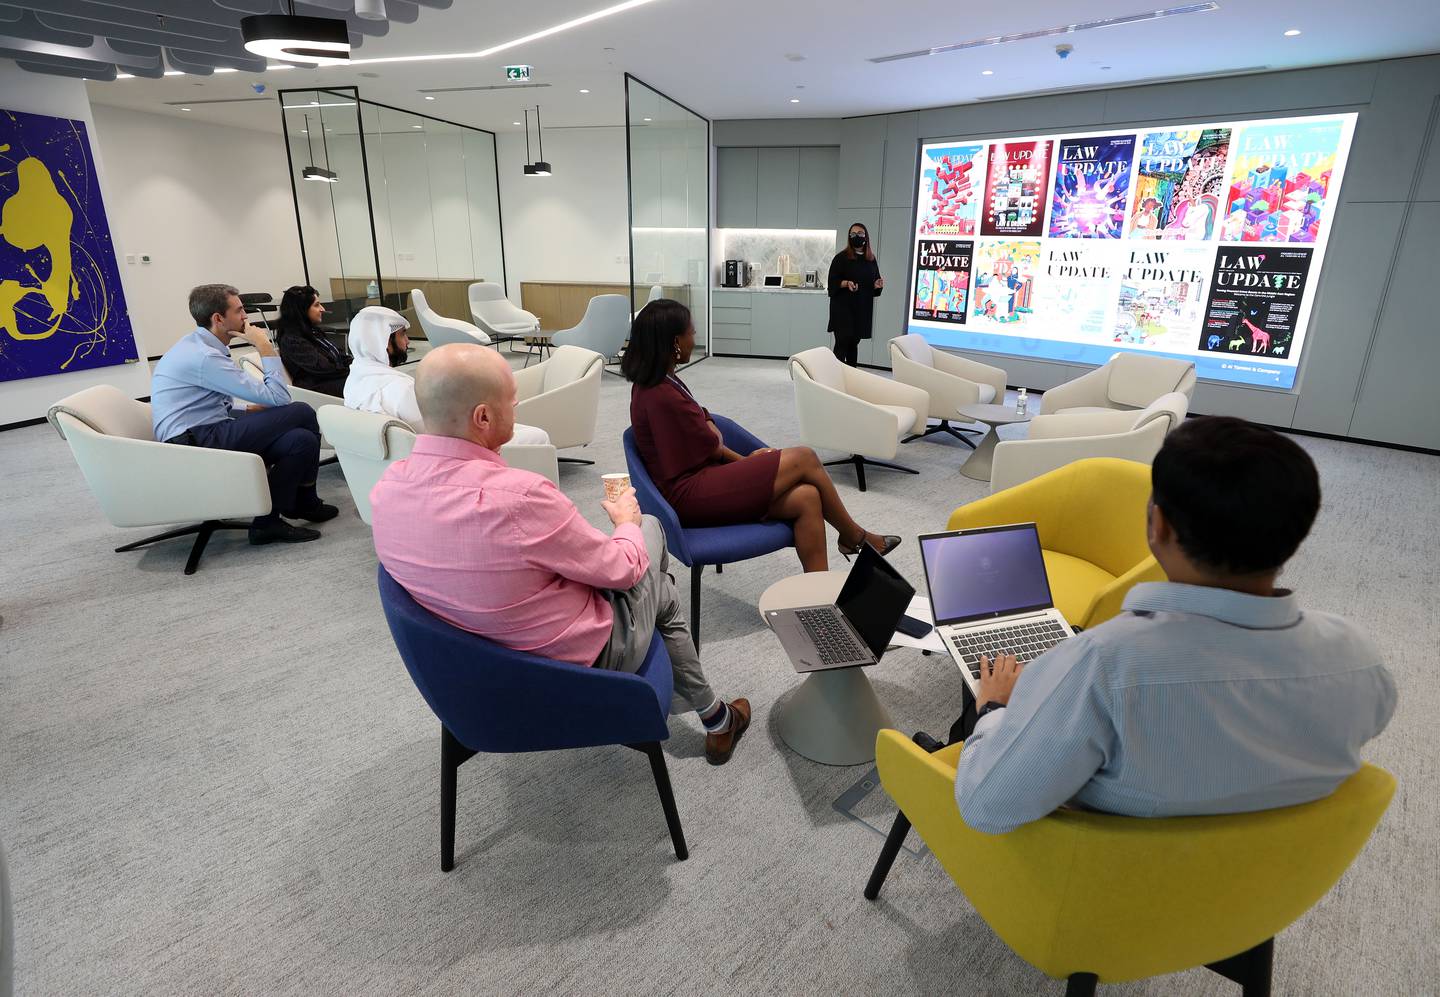 The large collaboration area between the two floors of the DIFC building that law firm Al Tamimi & Company occupies houses a digital communication screen and break-out pods. This area creates an inspiring environment for staff. Photo: Chris Whiteoak / The National